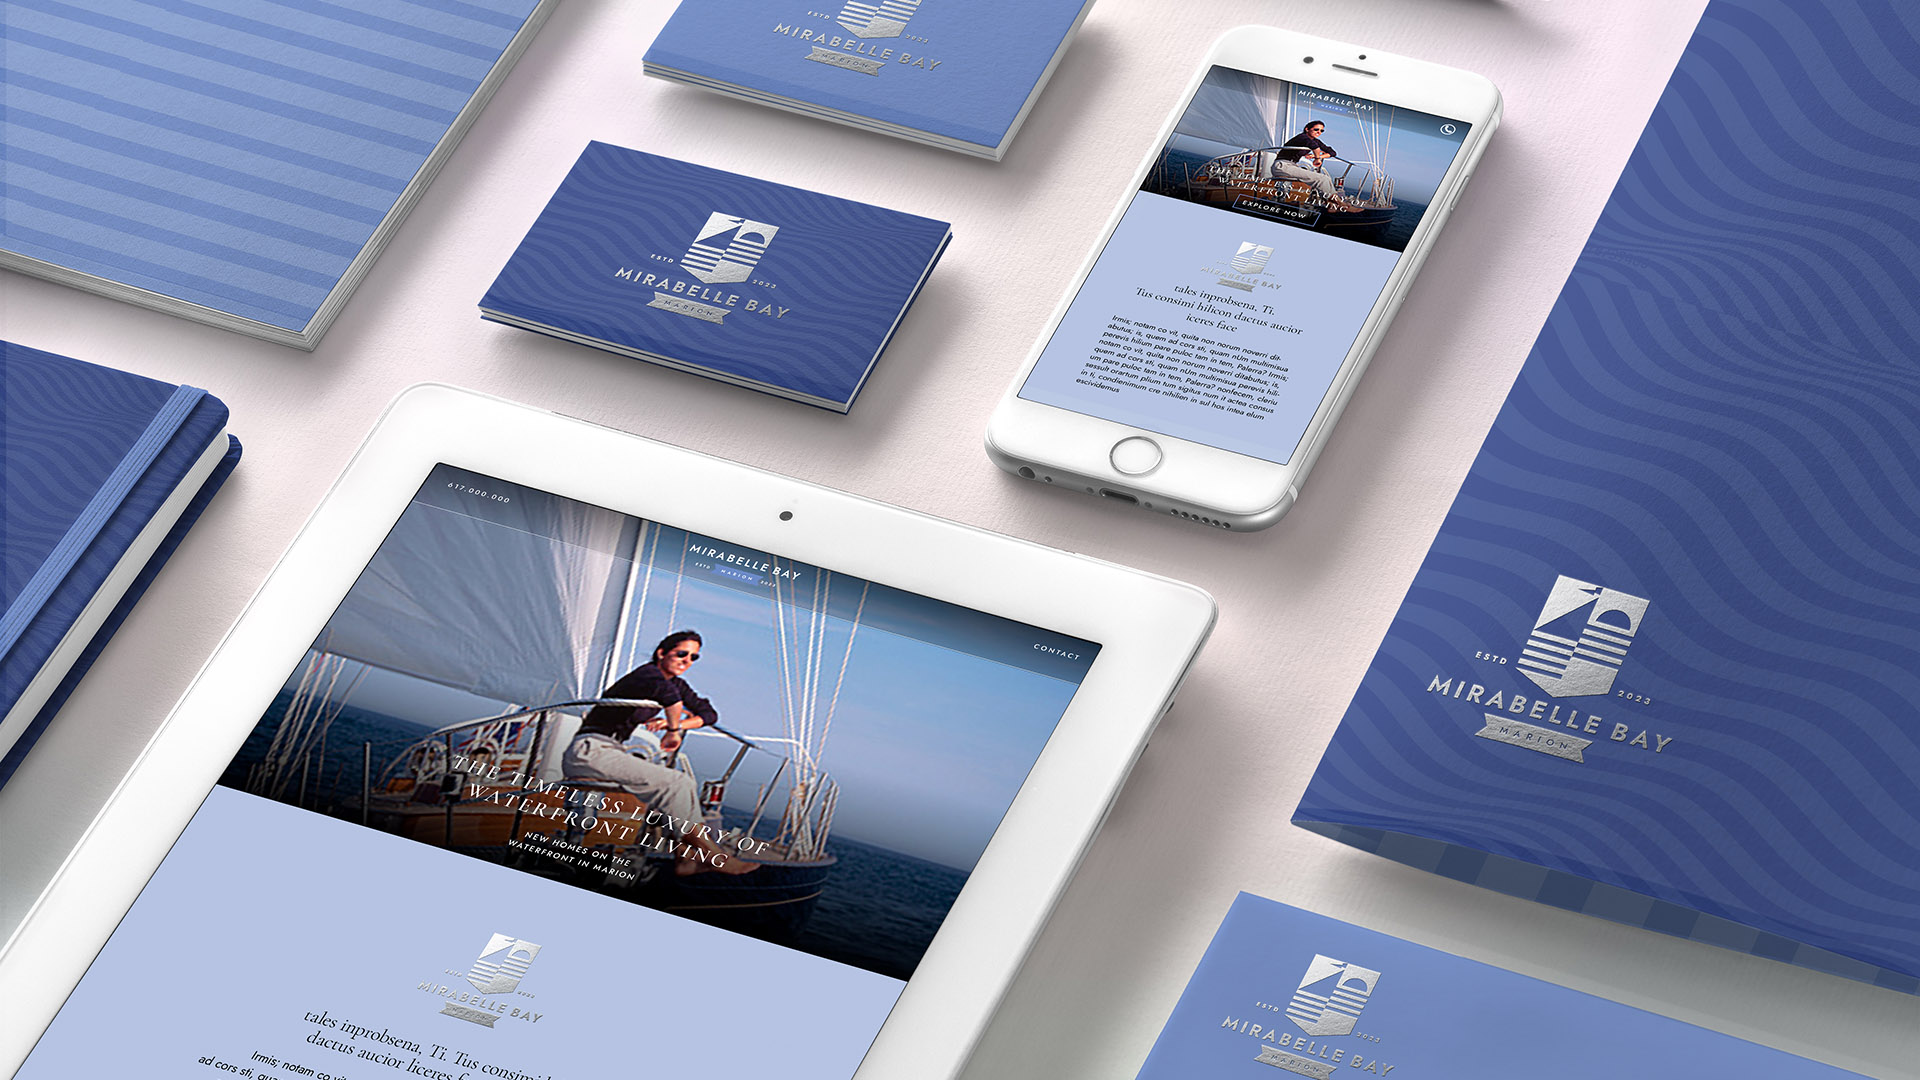 mirabelle bay branding with ipad and folder